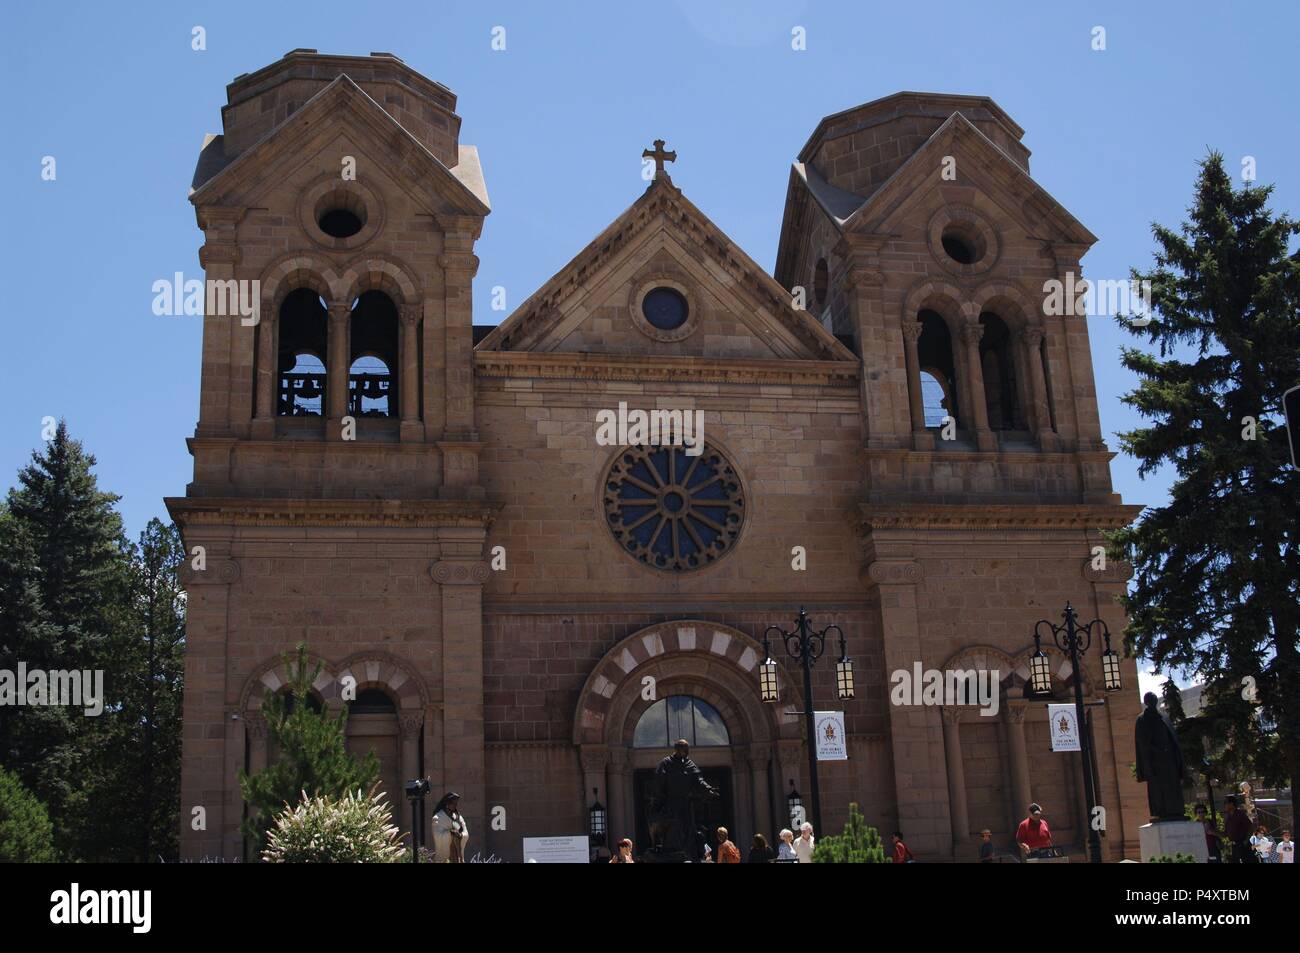 United States. Santa Fe. Cathedral of Saint Francis of Assisi, built by Jean Baptiste Larry (1814-1888), 19th century. Exterior. State of New Mexico. Stock Photo